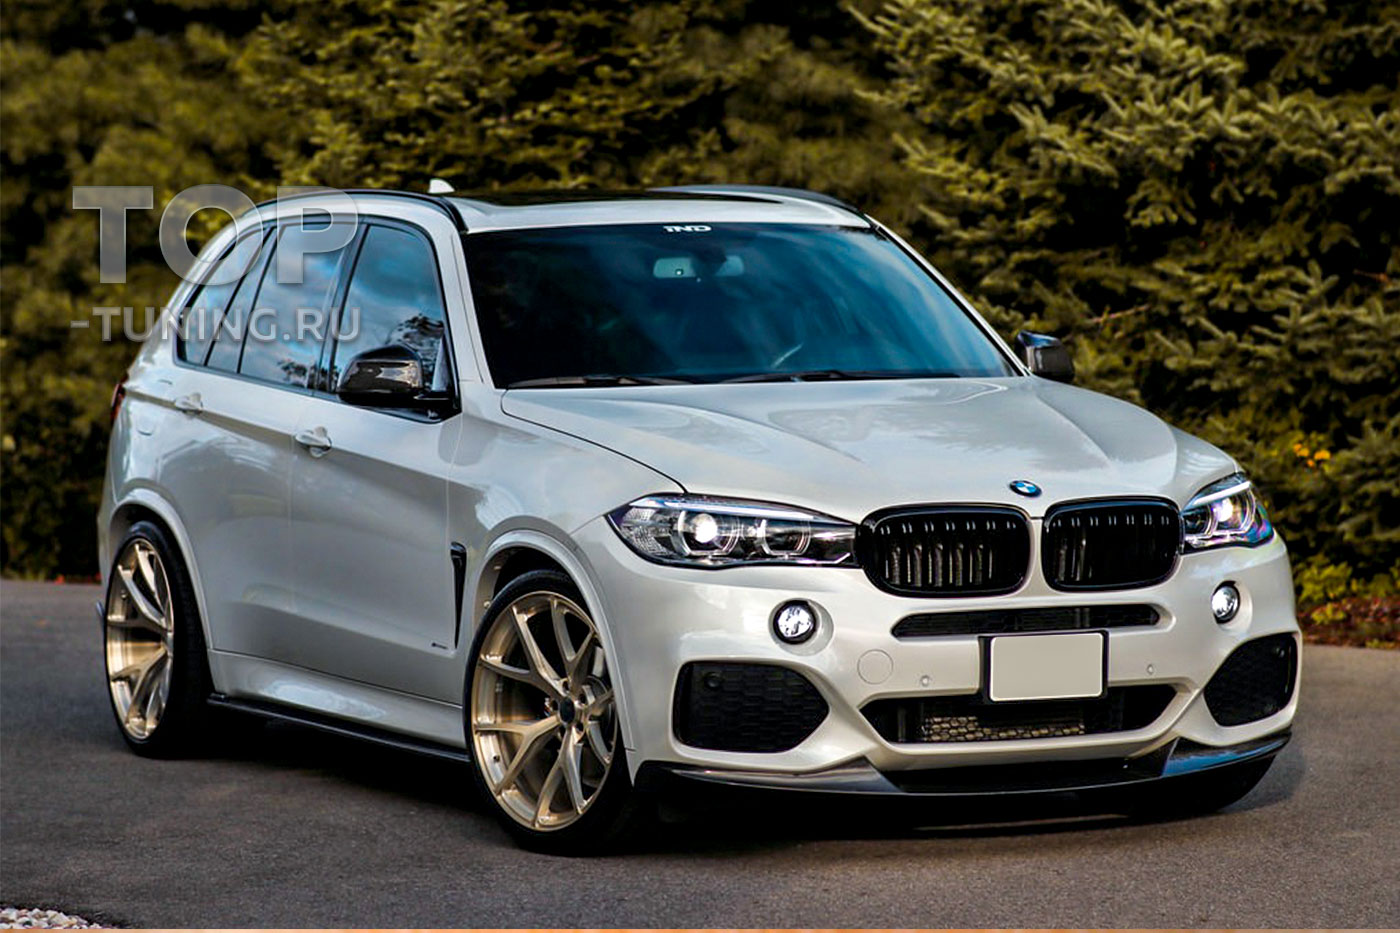 https://top-tuning.ru/upload/images/catalog/10519/obves_perfromance_tuning_bmw_x5_f15_01.jpg